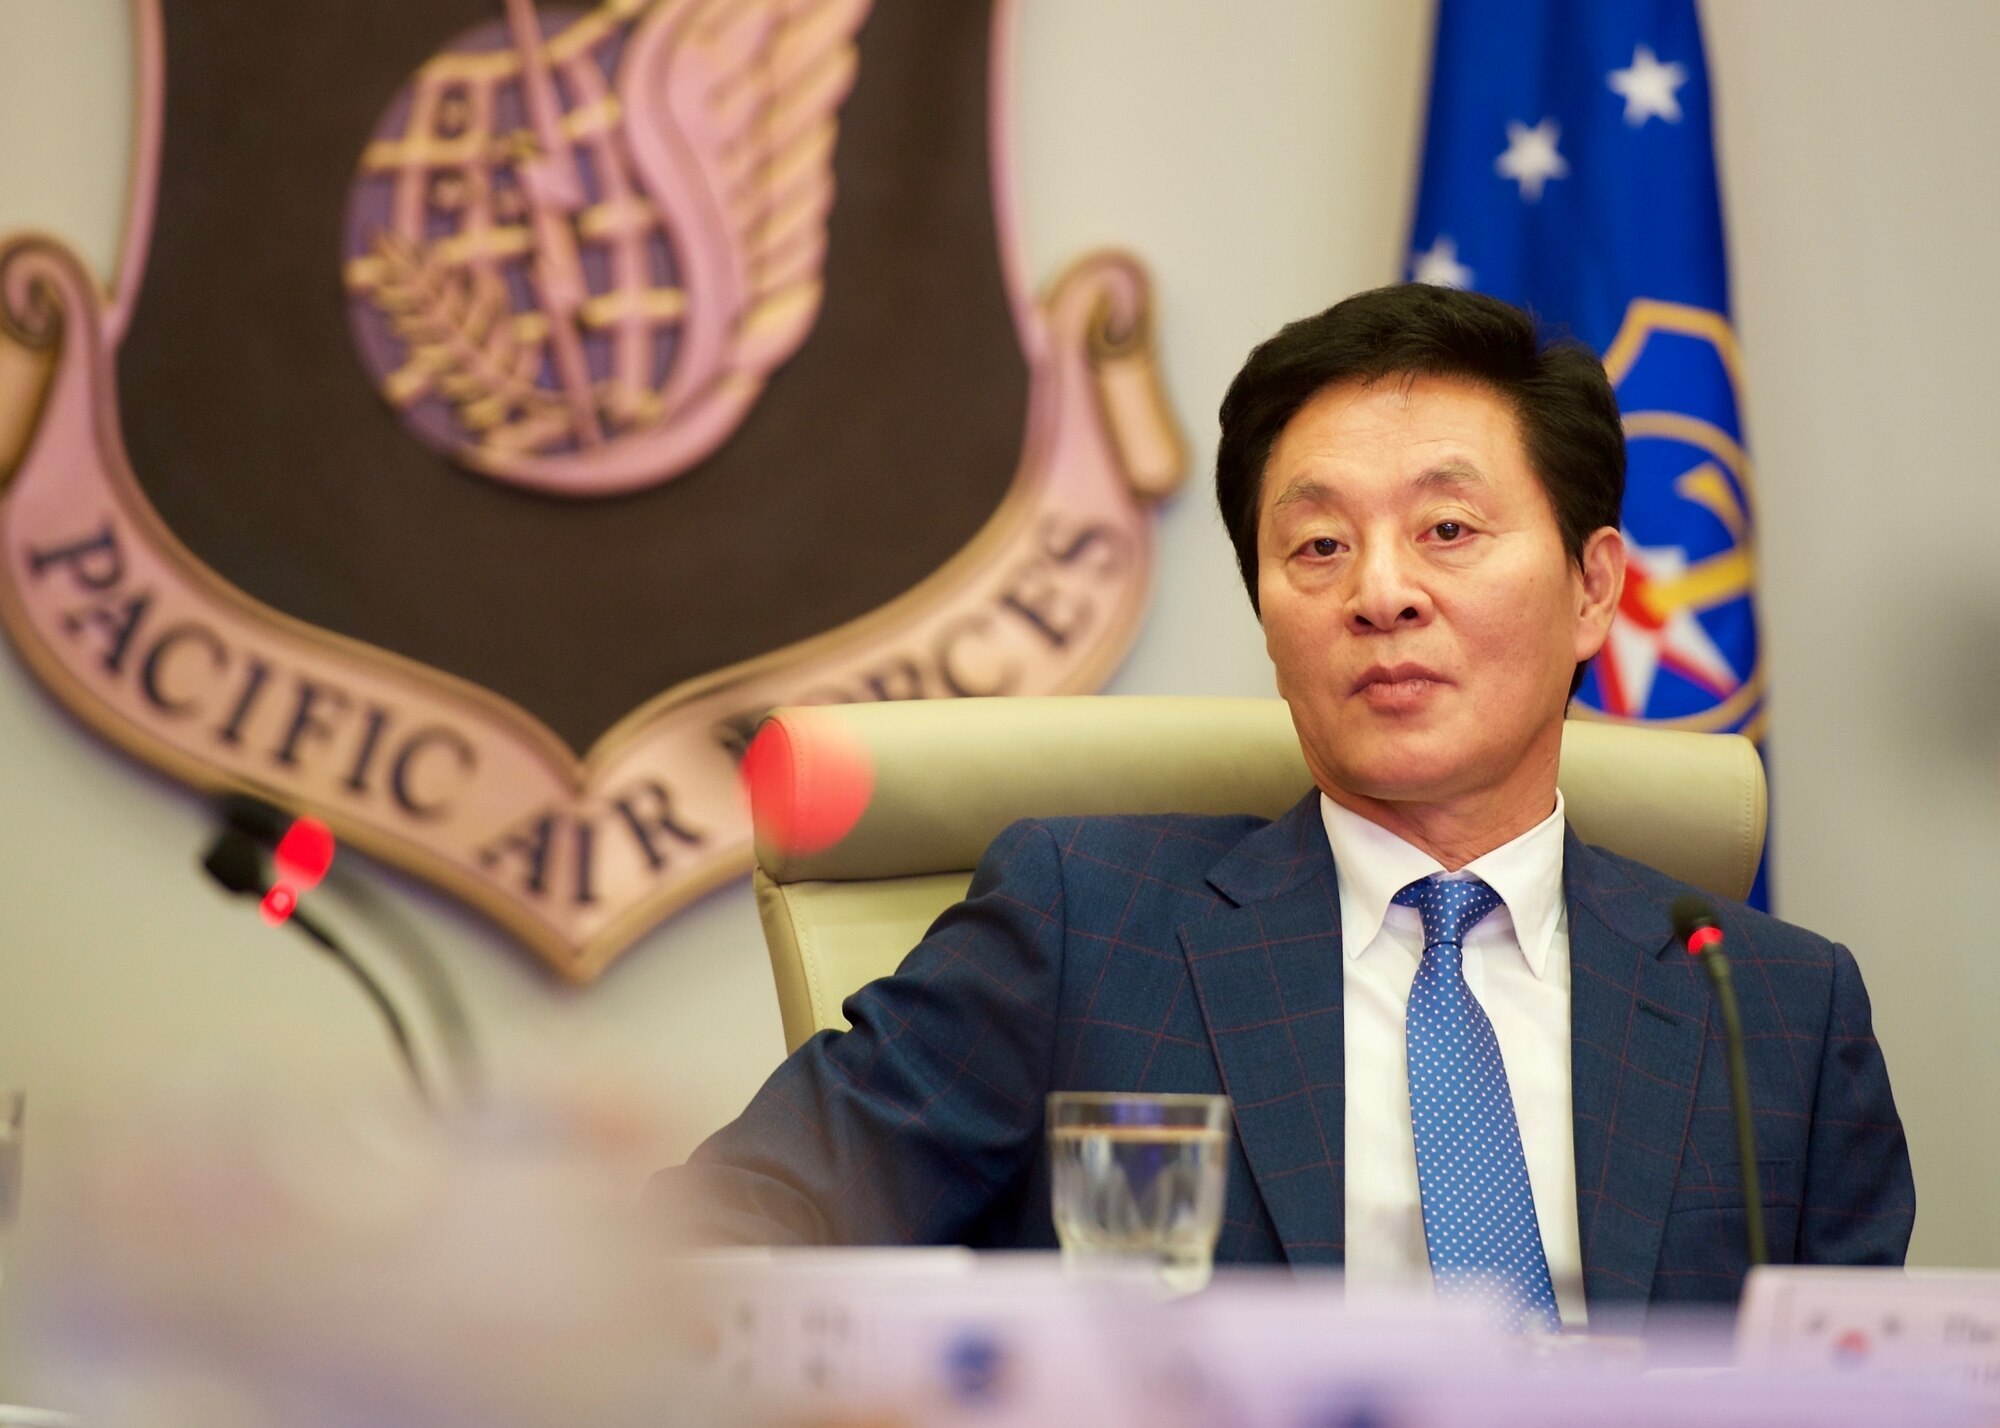 The Honorable Chung, Doo Un, Republic of Korea’s Chairman of the National Assembly Defense Committee, listens to comments during a question and answer session as part of his visit to Headquarters Pacific Air Forces, Joint Base Pearl Harbor-Hickam, Hawaii, Dec. 14, 2015. Chung's visit to PACAF included discussions on U.S. and ROK defense policy issues aimed at strengthening and enhancing both nations' capabilities and readiness during crises. (U.S. Air Force photo by Tech. Sgt. James Stewart/Released)